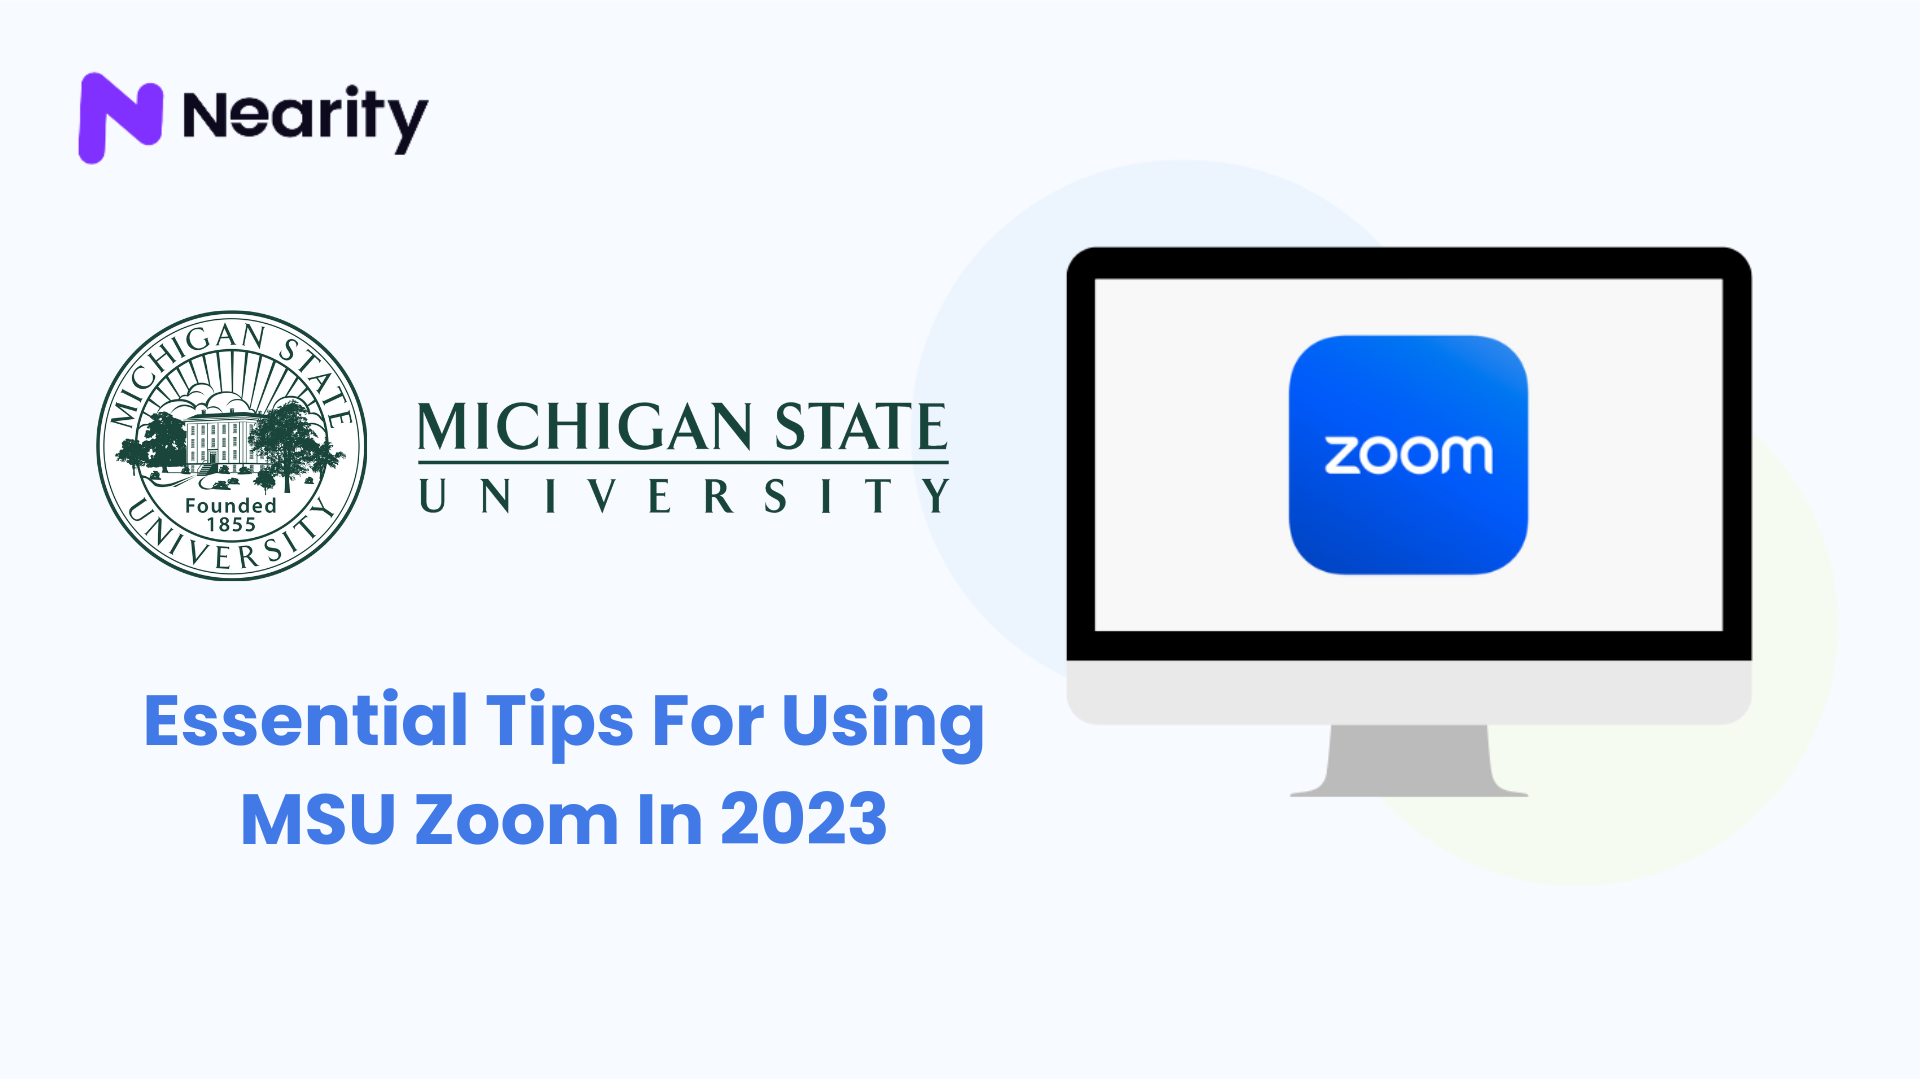 Essential Tips For Using MSU Zoom In 2023